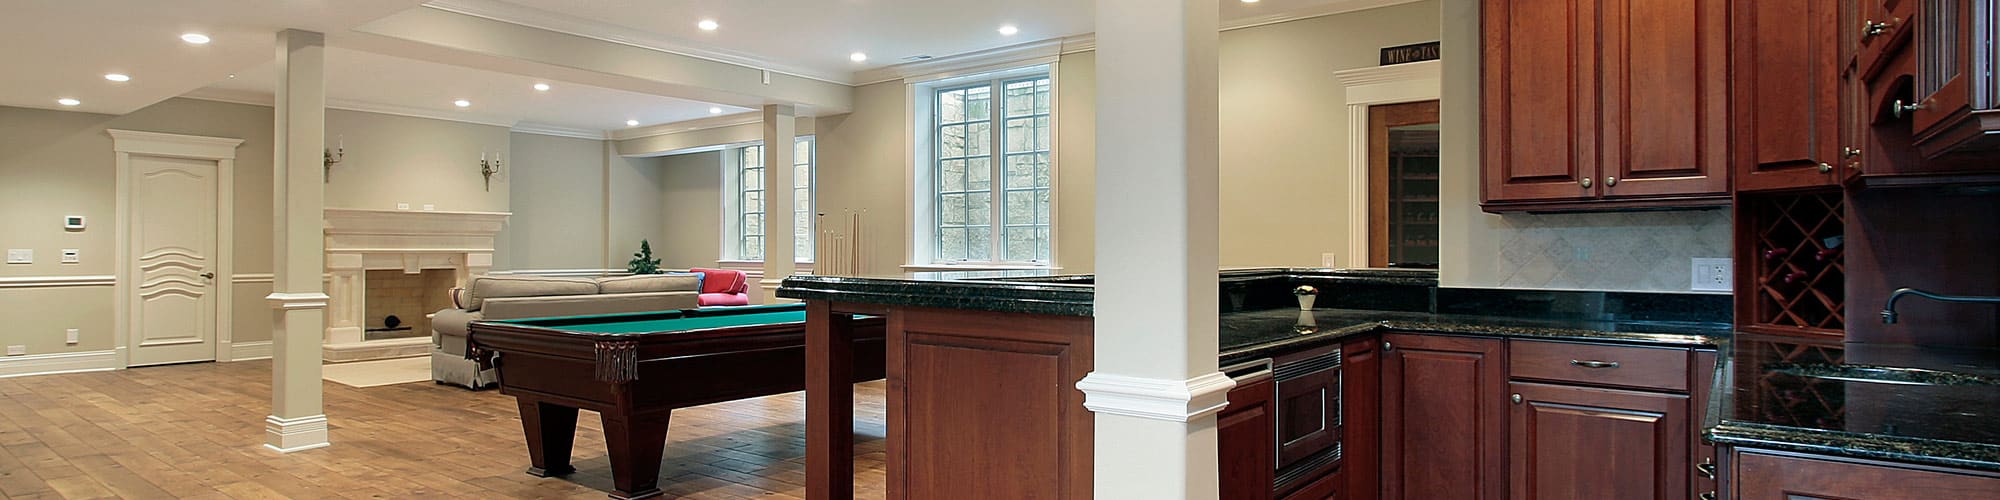 Walkout Basements Vs Traditional Which Is Worth The Cost